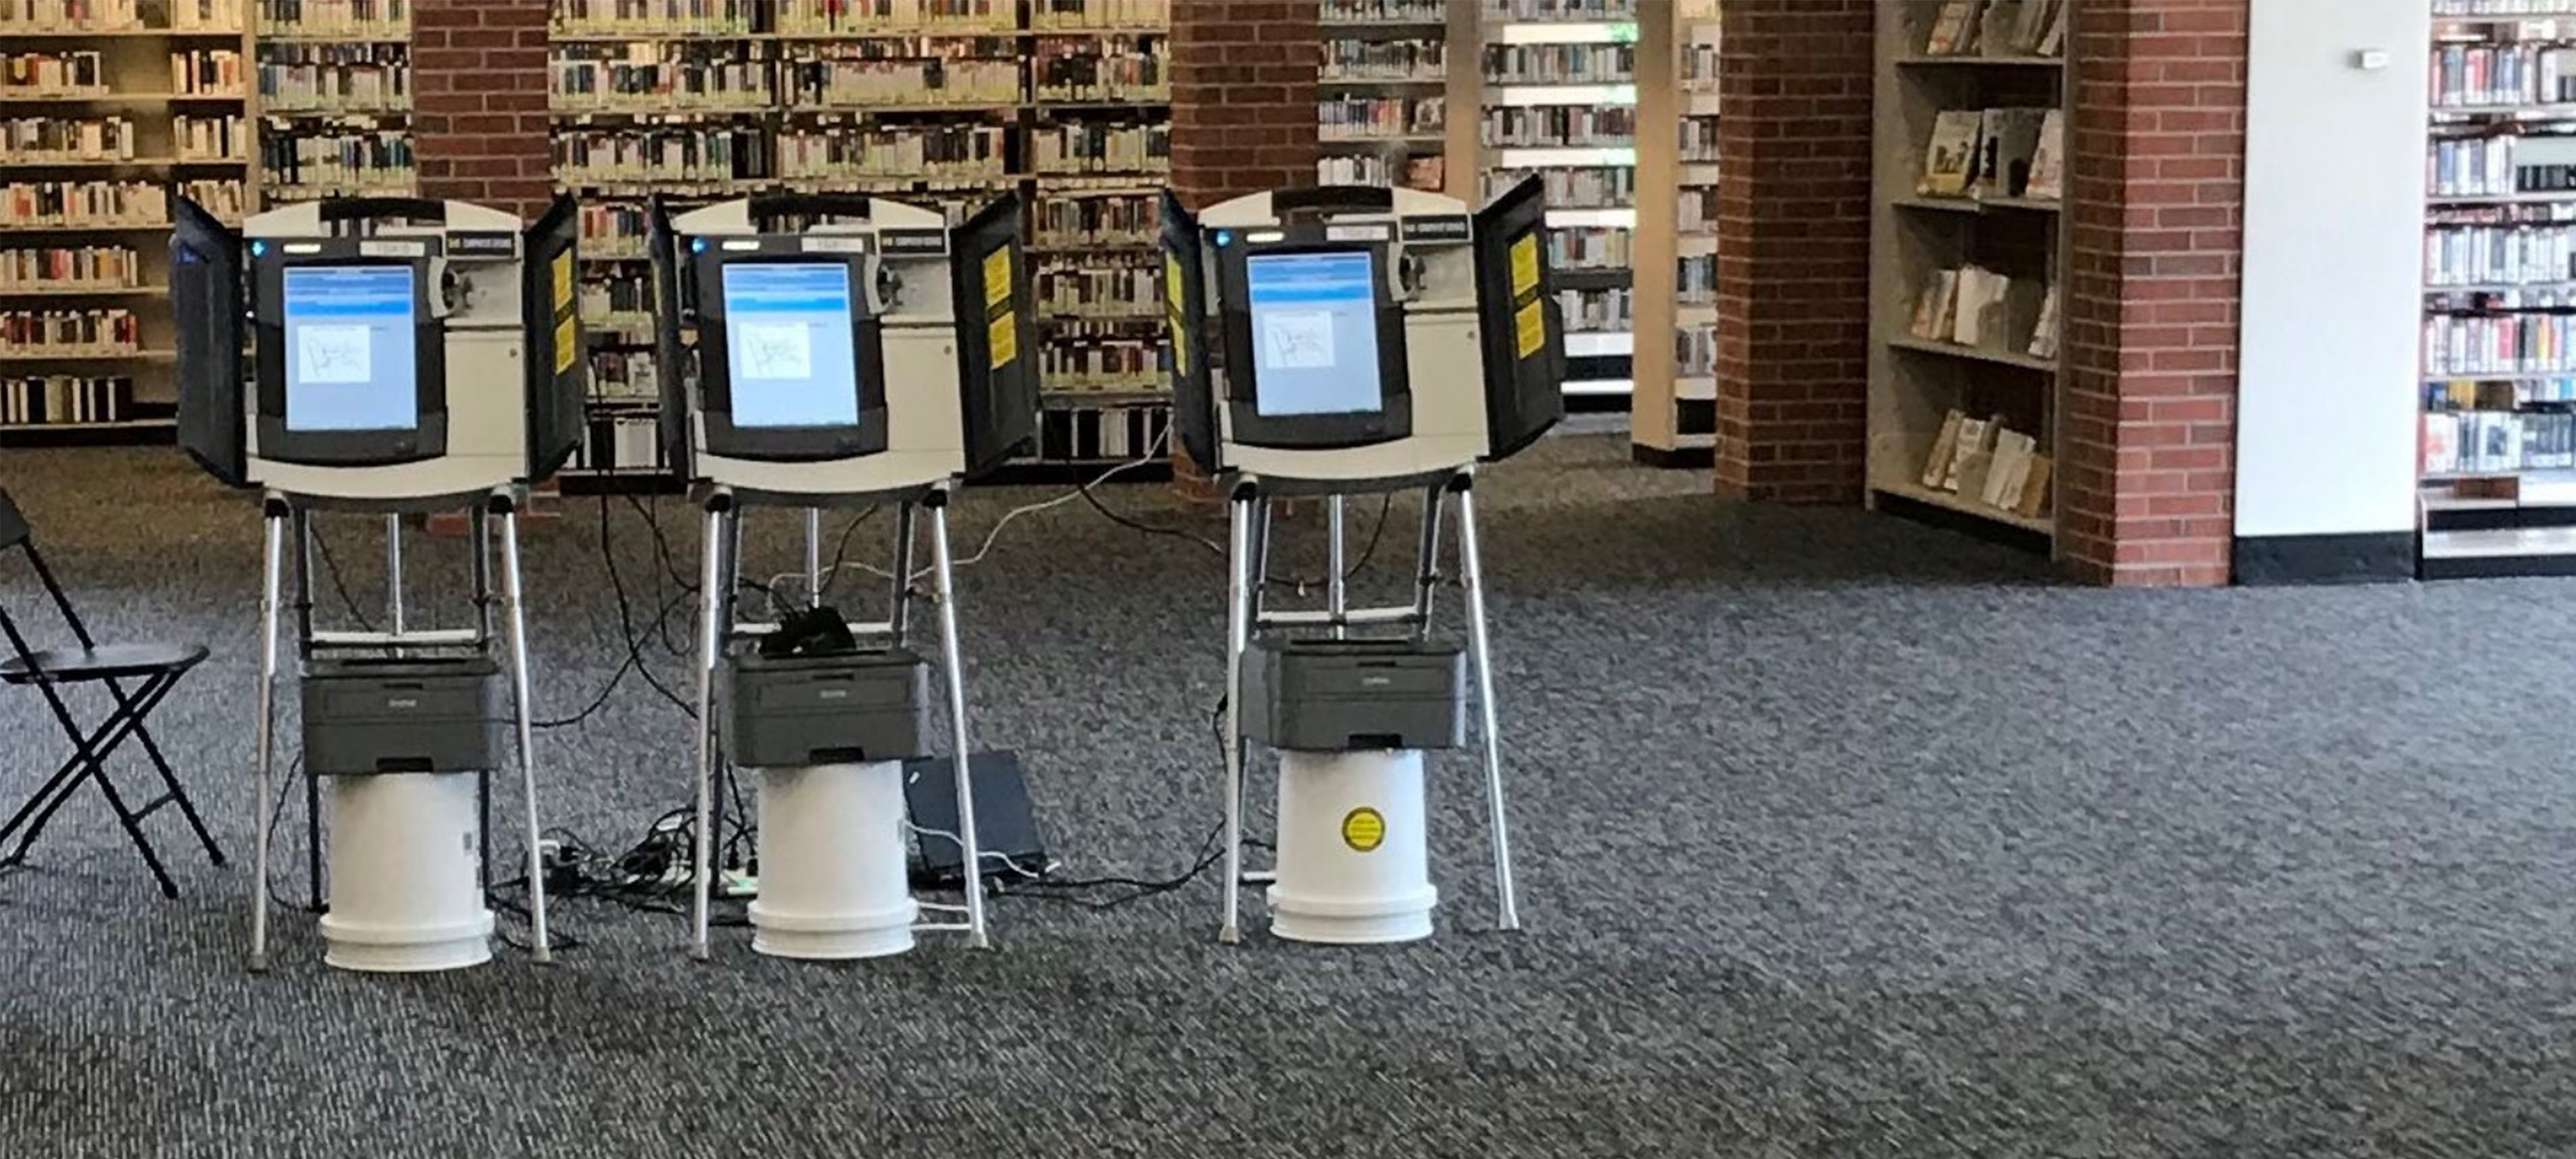 Voting machines at library